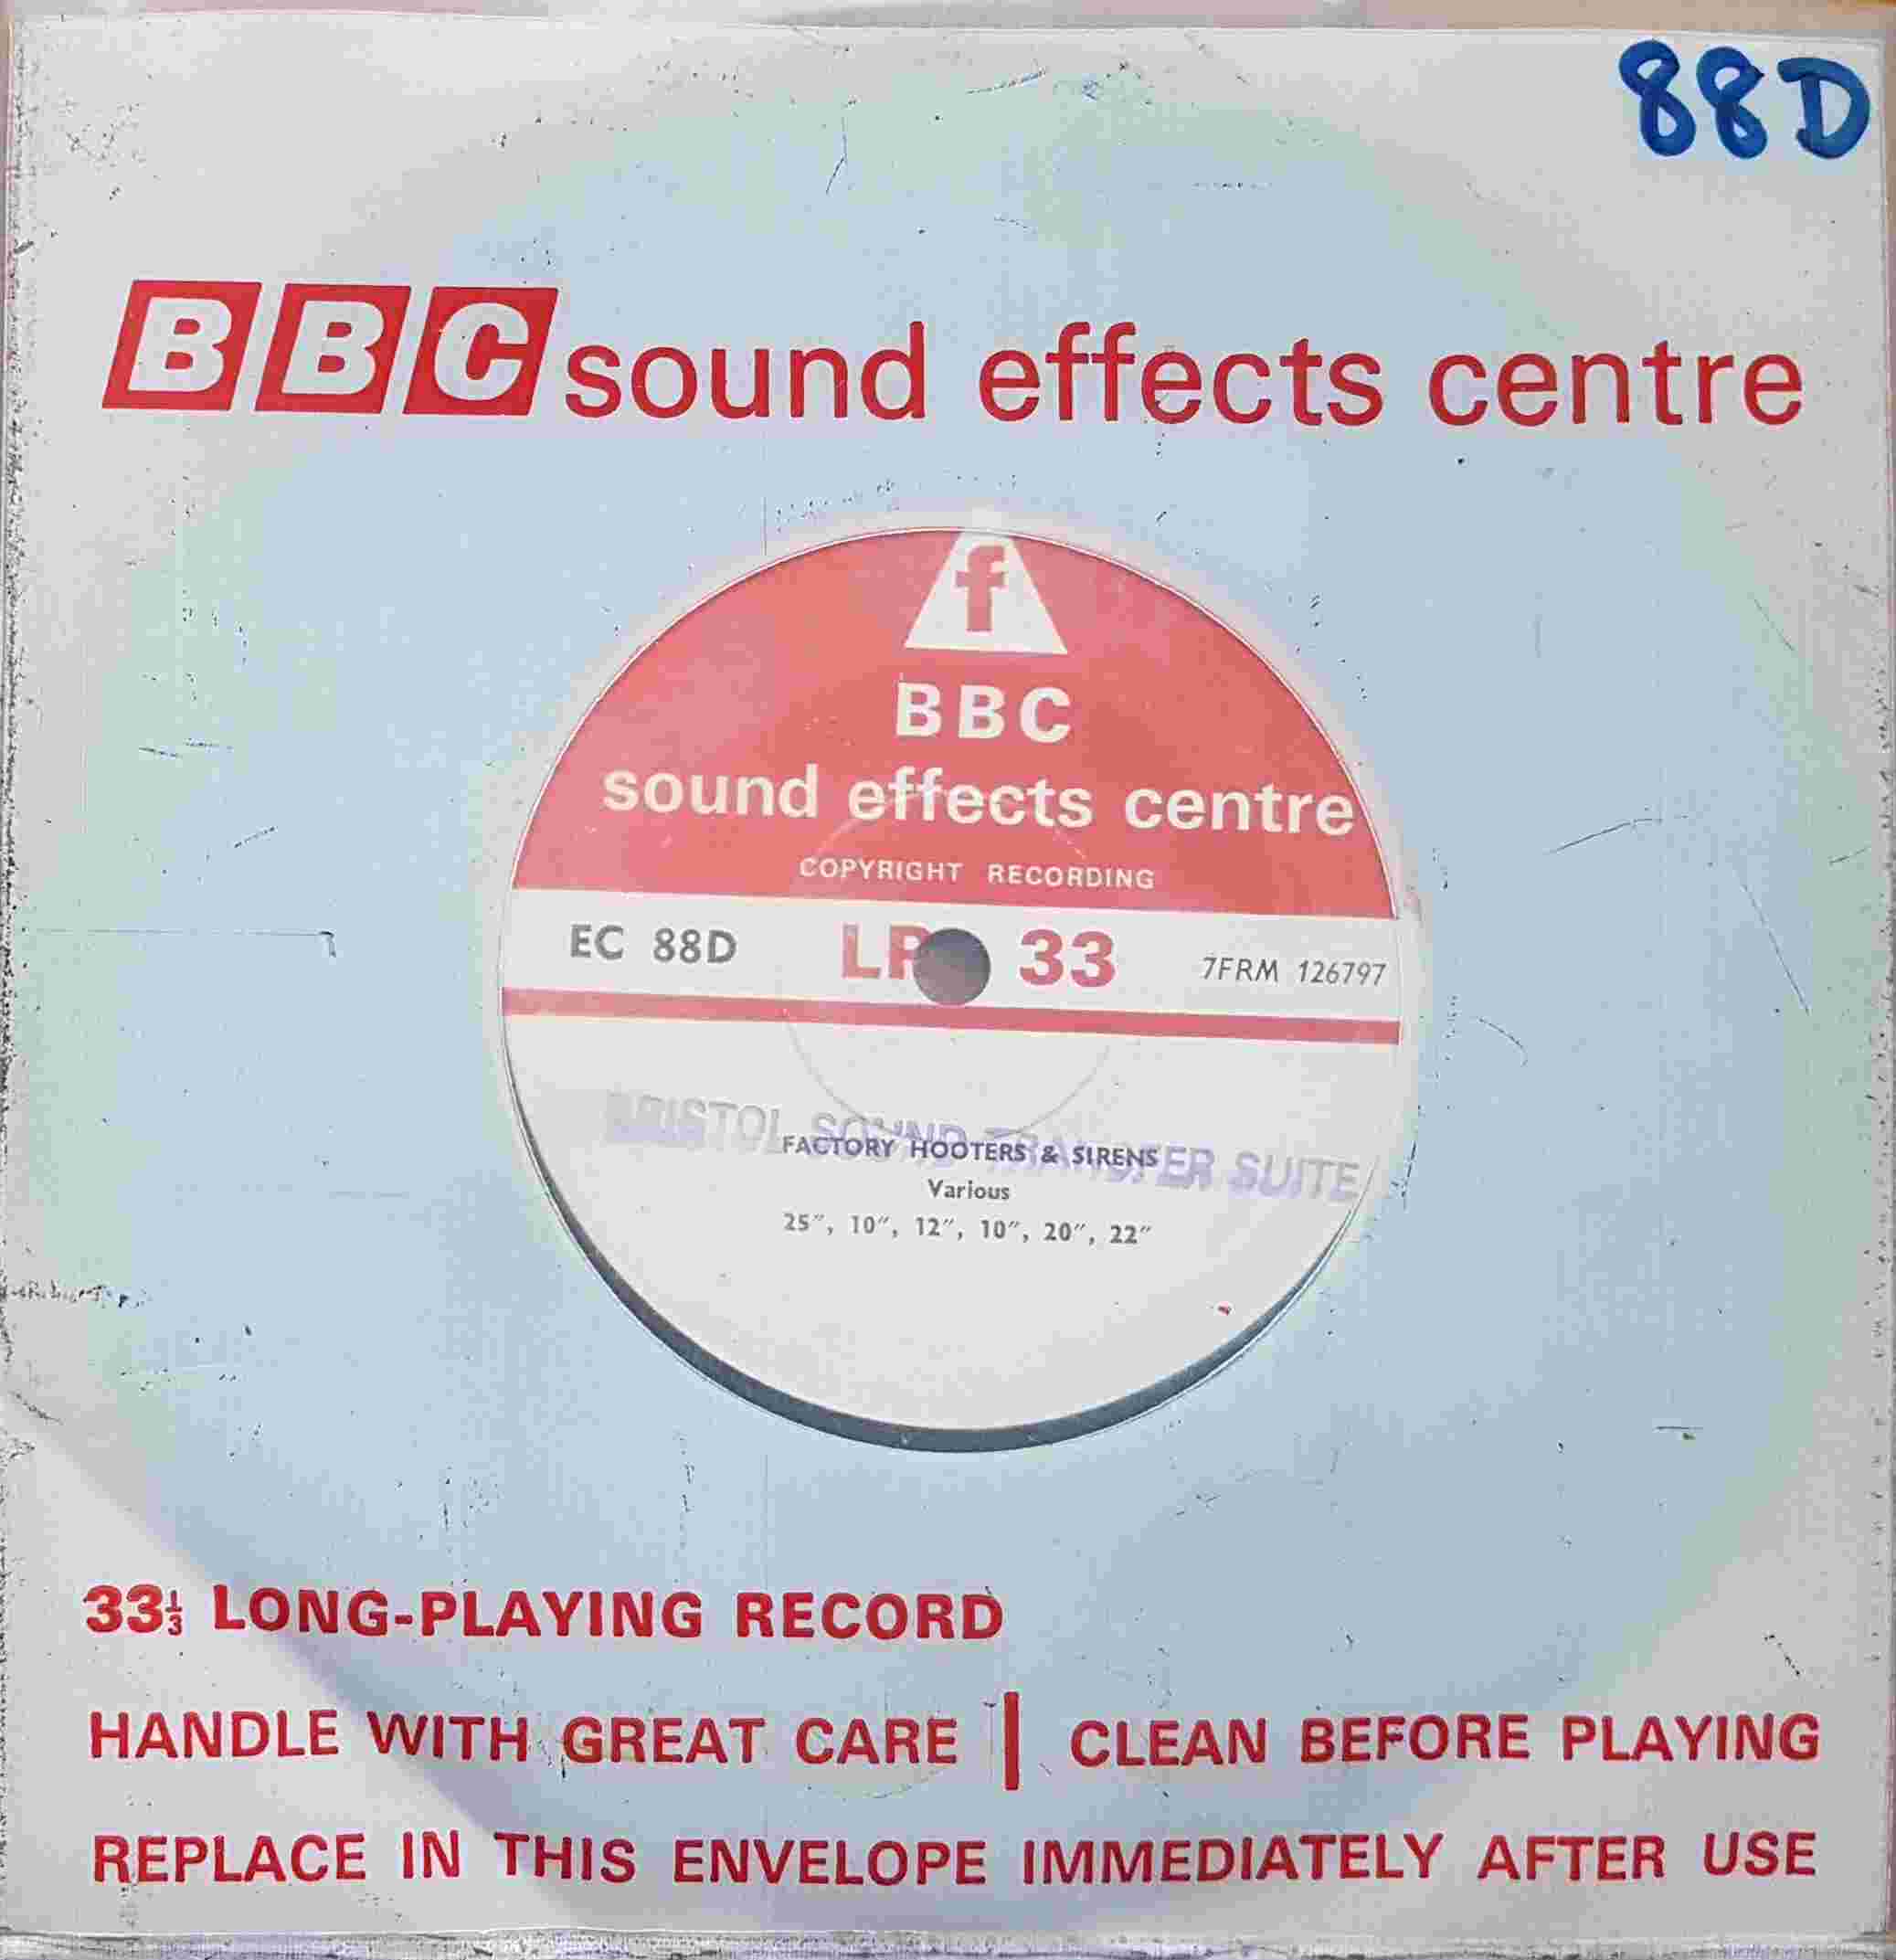 Picture of EC 88D Factory hooters & sirens by artist Not registered from the BBC records and Tapes library